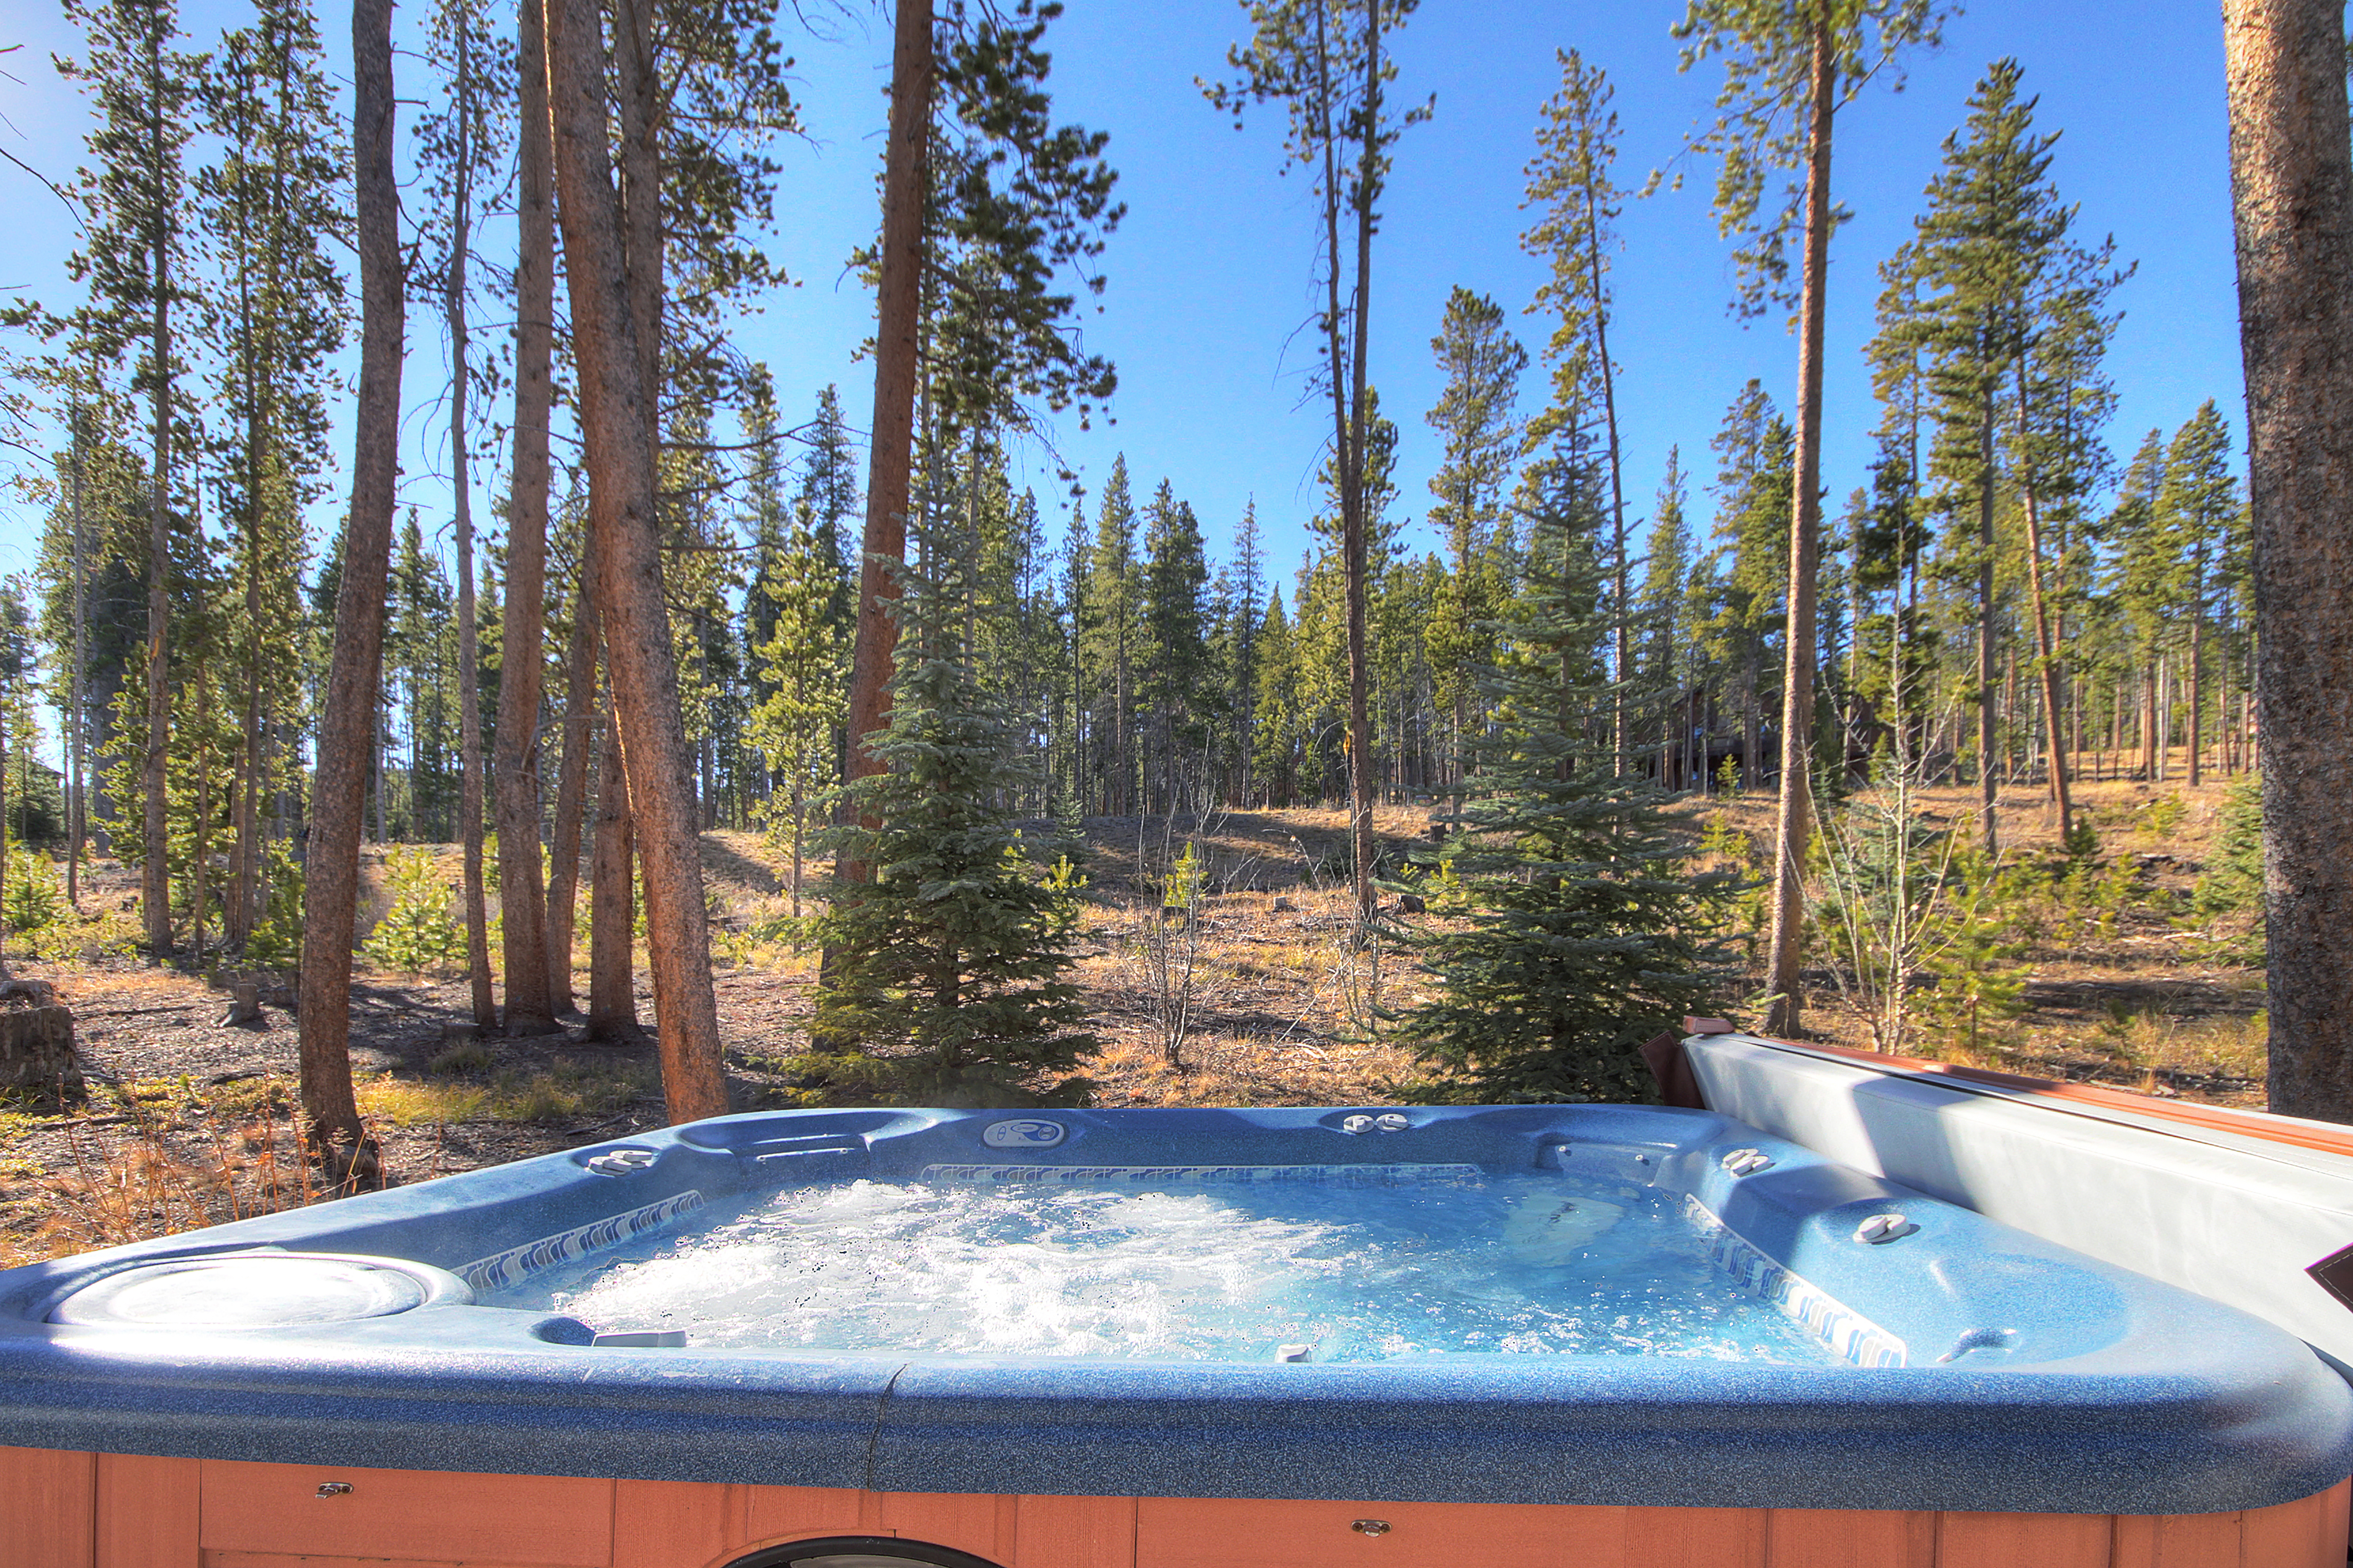 Enjoy the hot tub after a long day - Highlands Trail House Breckenridge Vacation Rental